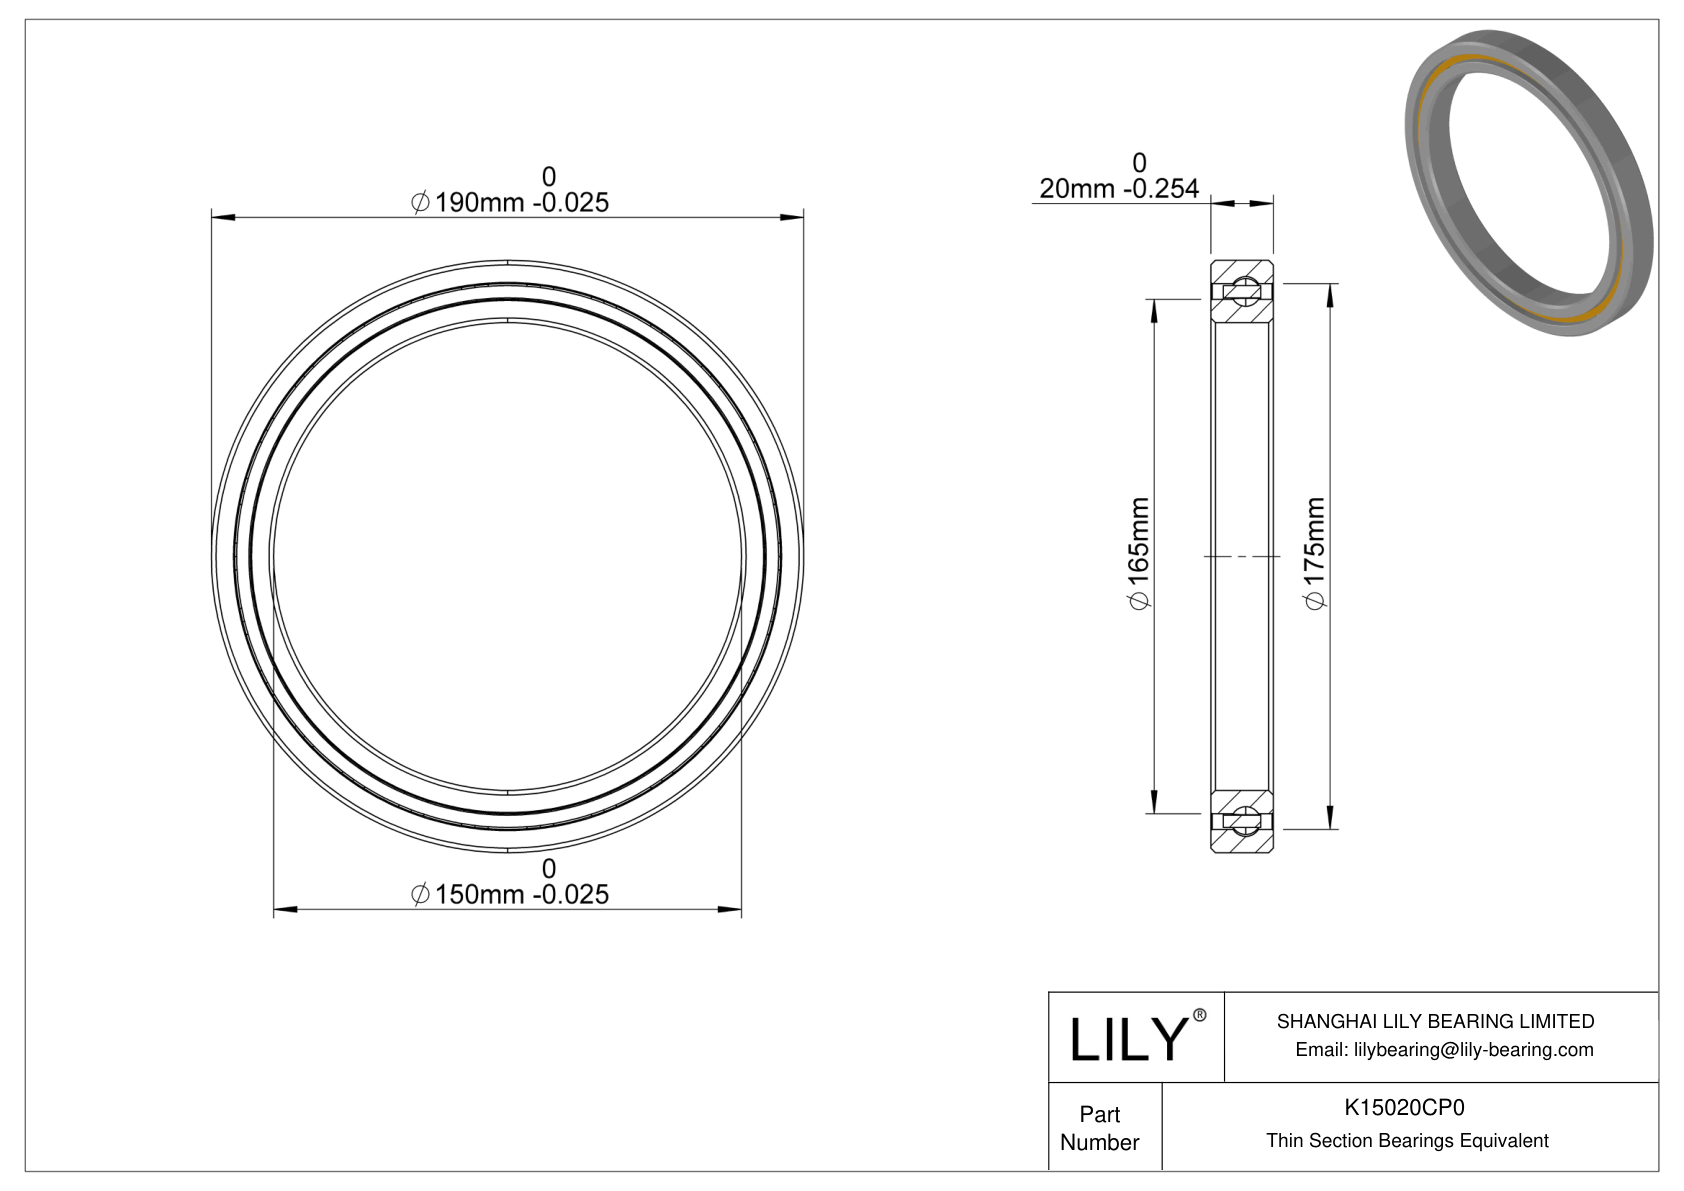 K15020CP0 Constant Section (CS) Bearings cad drawing